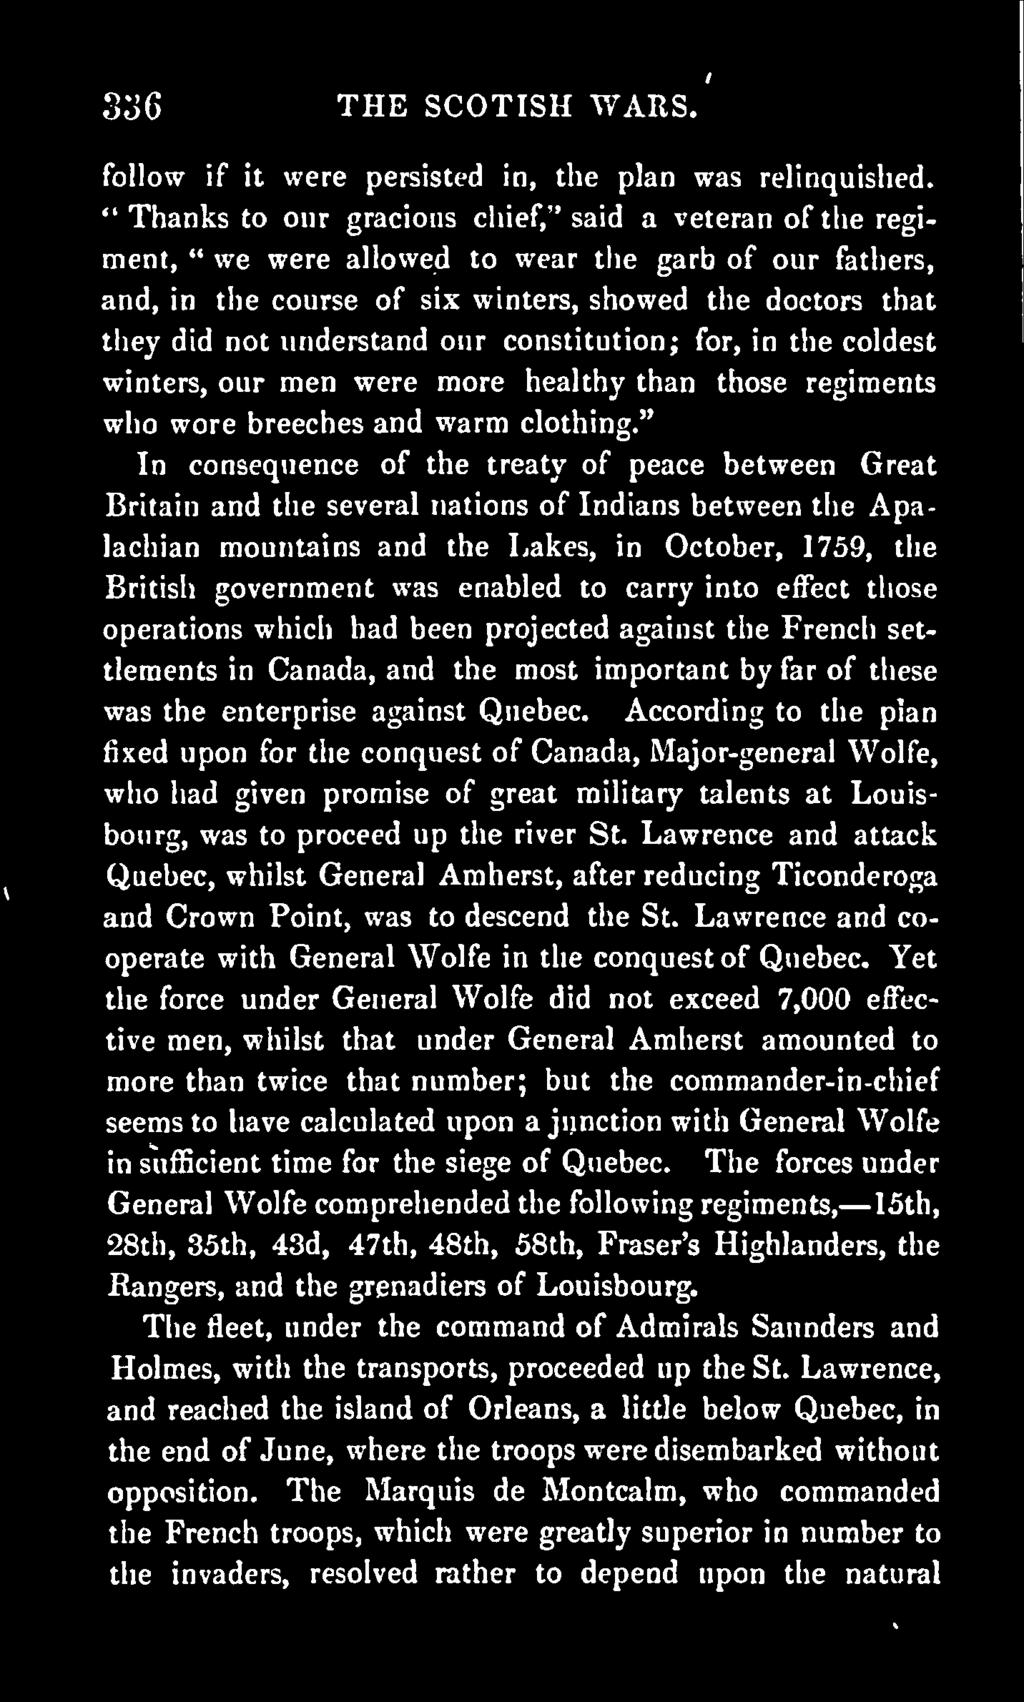 to carry into effect those operations which had been projected against the French settlements in Canada, and the most important by far of these was the enterprise against Quebec.